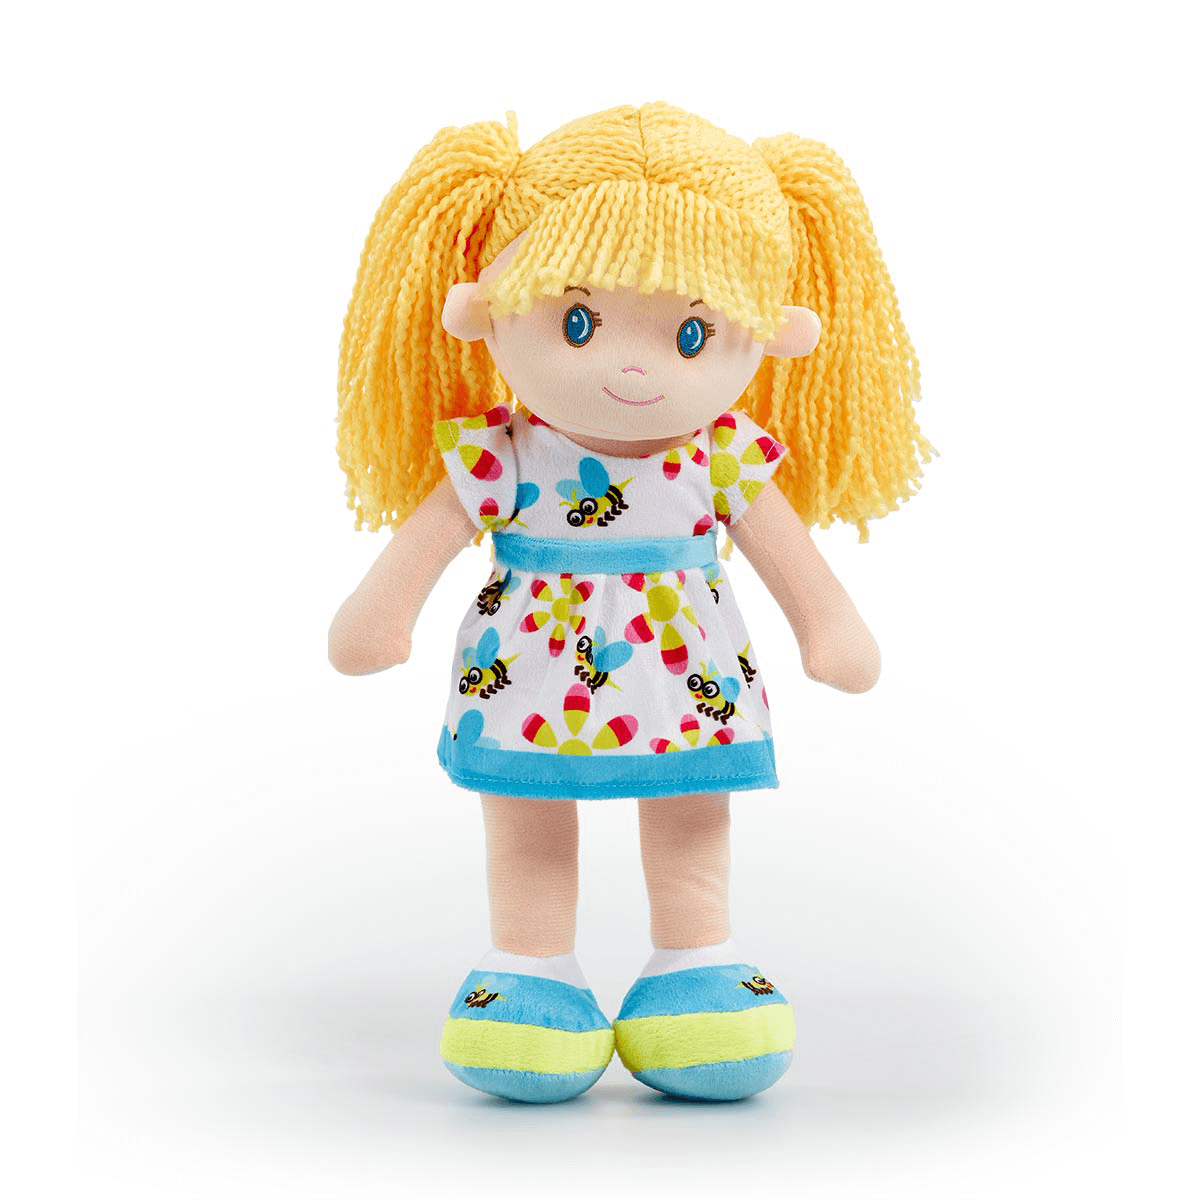 Snuggle Buddies 40cm Rag Doll - Blue | Early Learning Centre